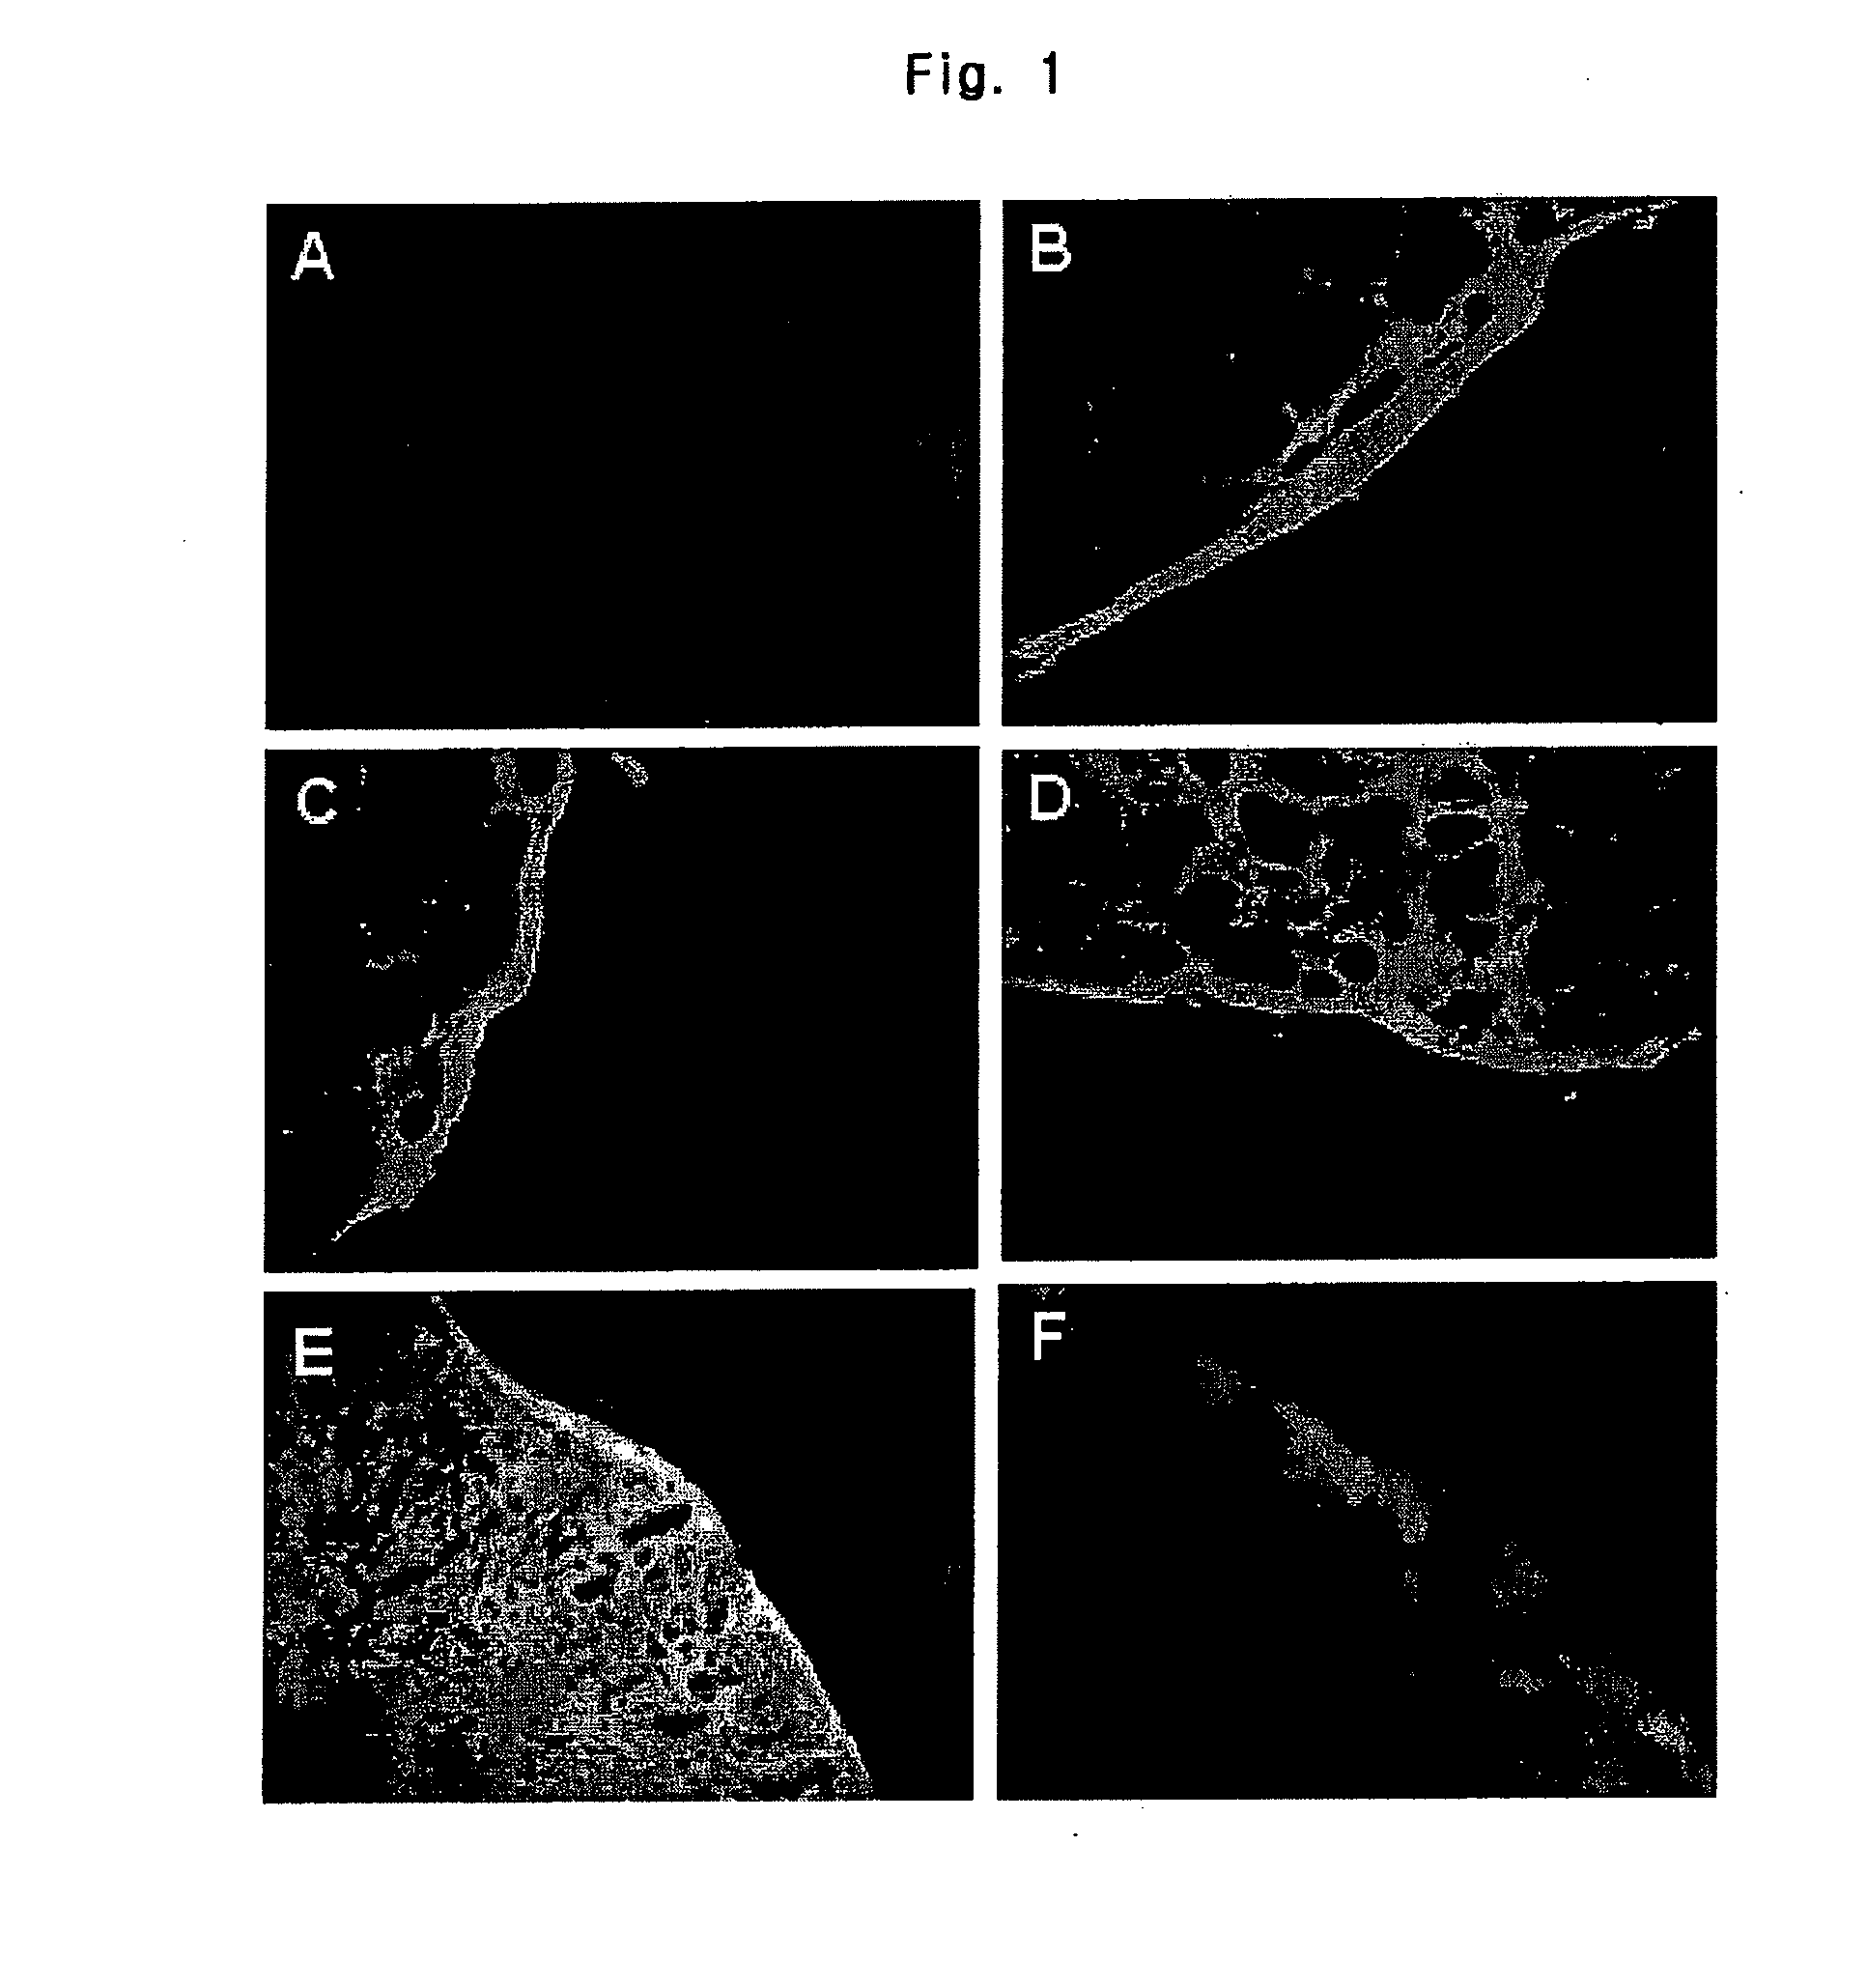 Inositol and trehalose derivatives and pharmaceutical compositions for treating neurodegenerative diseases comprising the same